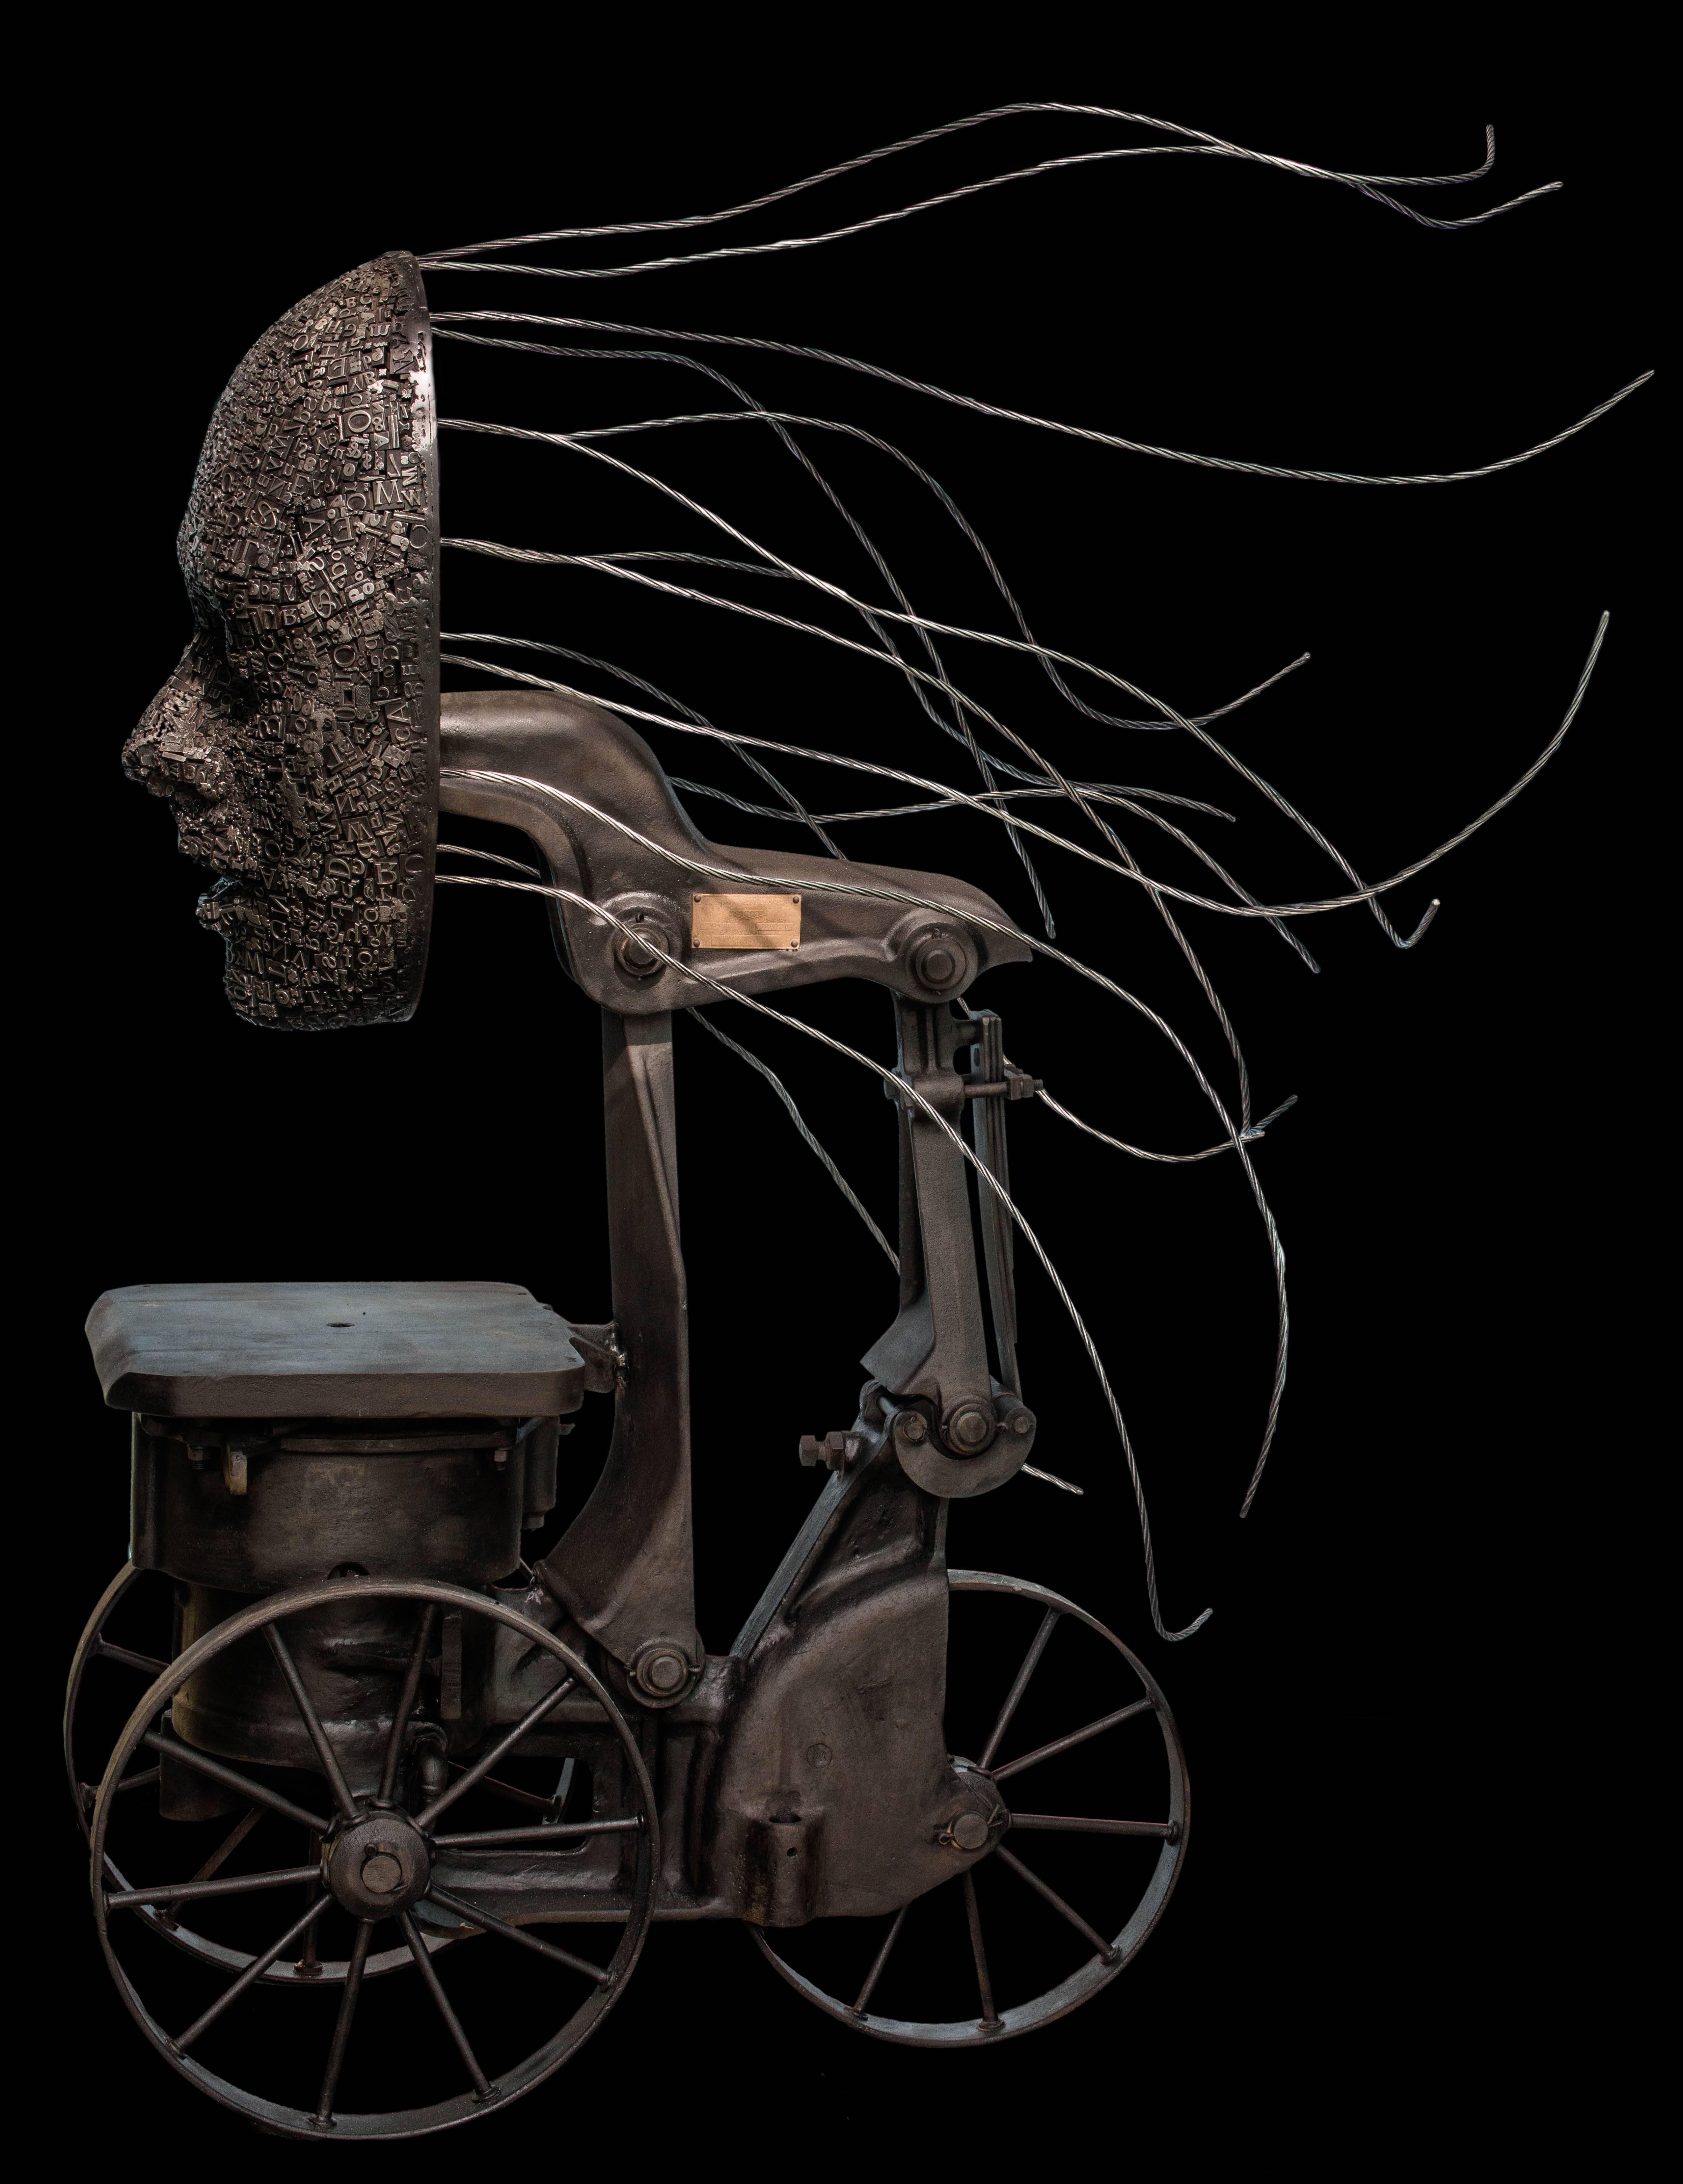 Press - tall, steam-punk inspired, human face, lead, aluminum and iron sculpture - Sculpture by Dale Dunning